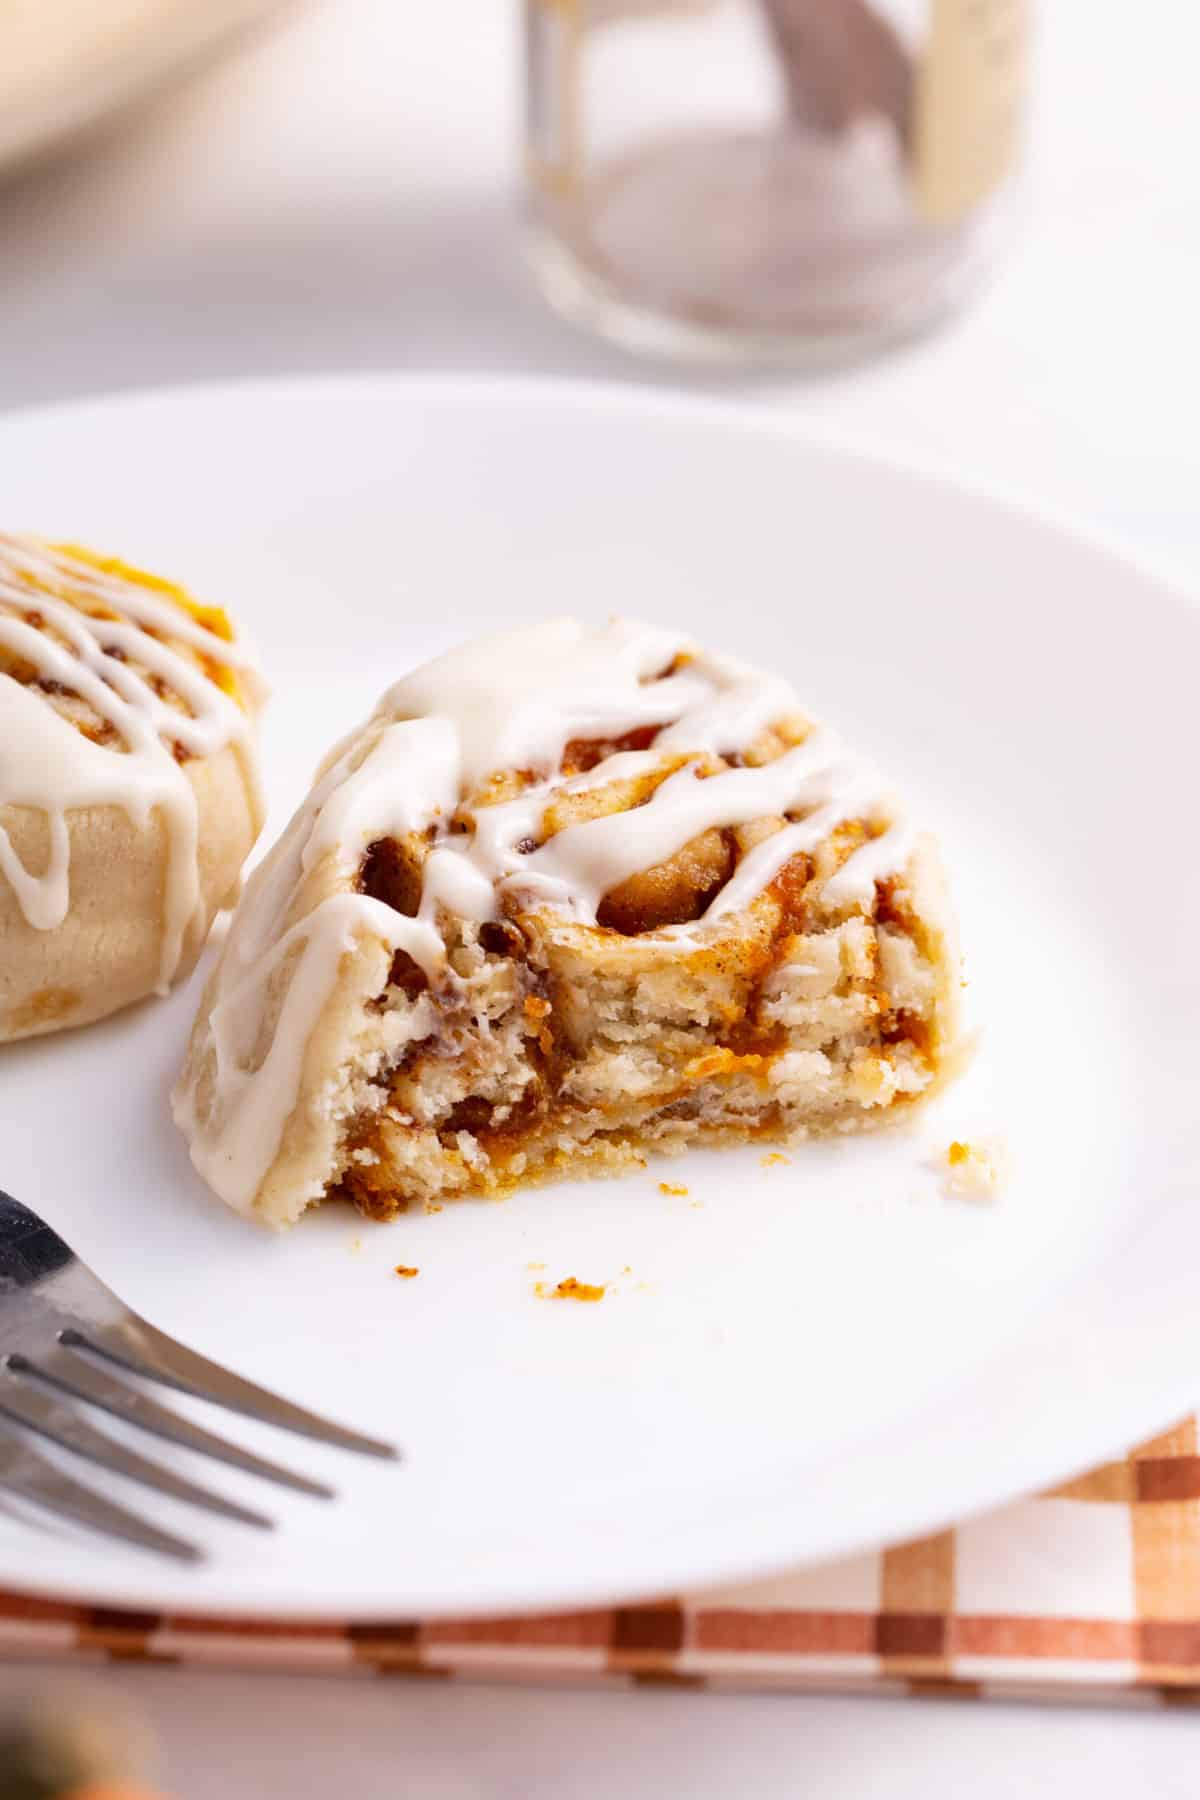 a serving of pumpkin cinnamon roll cut in half to show the cross section and served on a white round plate.